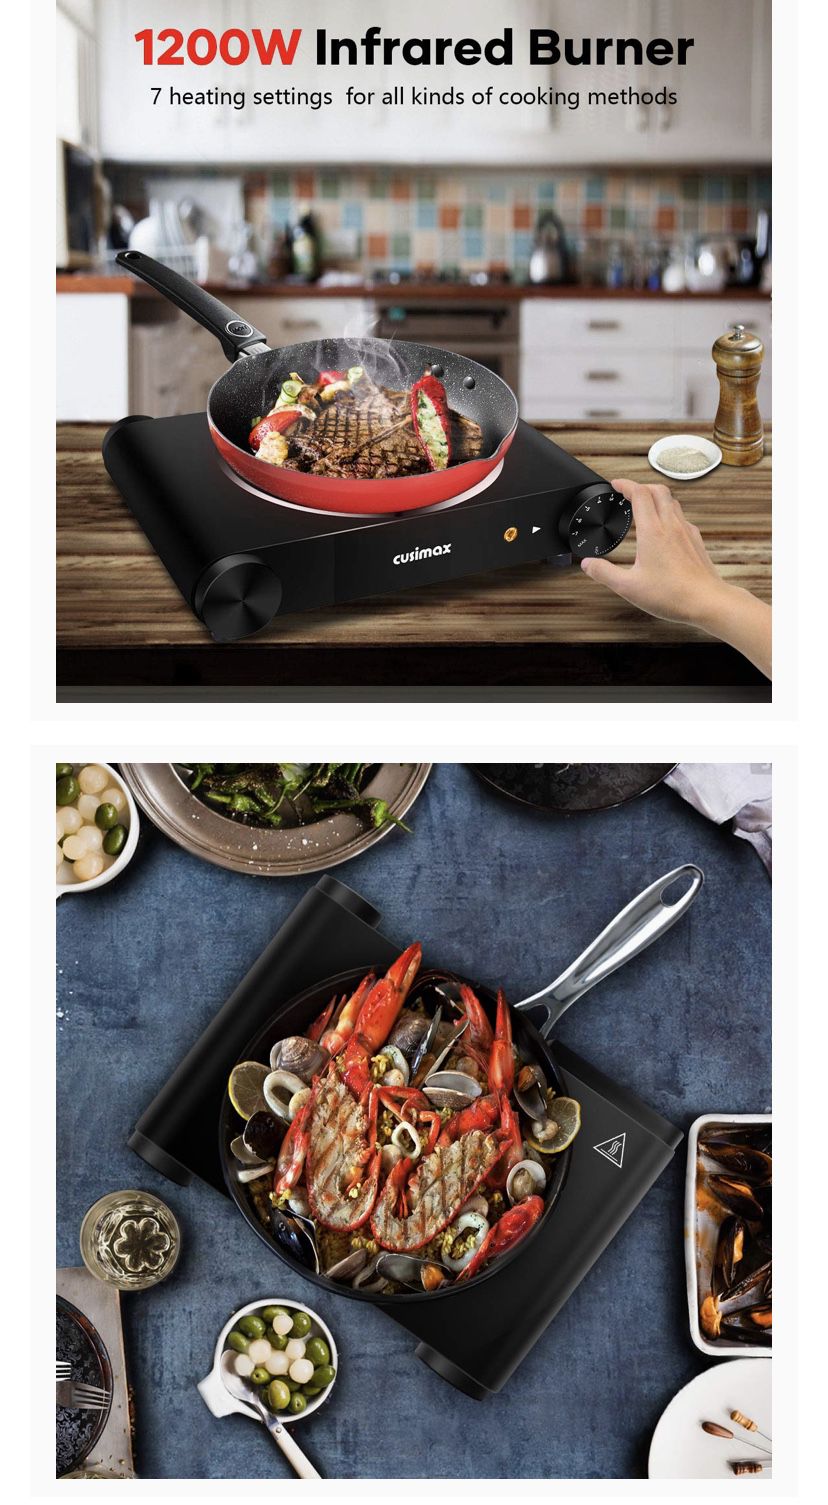 Single Burner 1200W, Infrared Electric Burner, Portable Stove Electric Cooktop, Ceramic Hot Plate, Easy to clean, Compatible with All Cookware